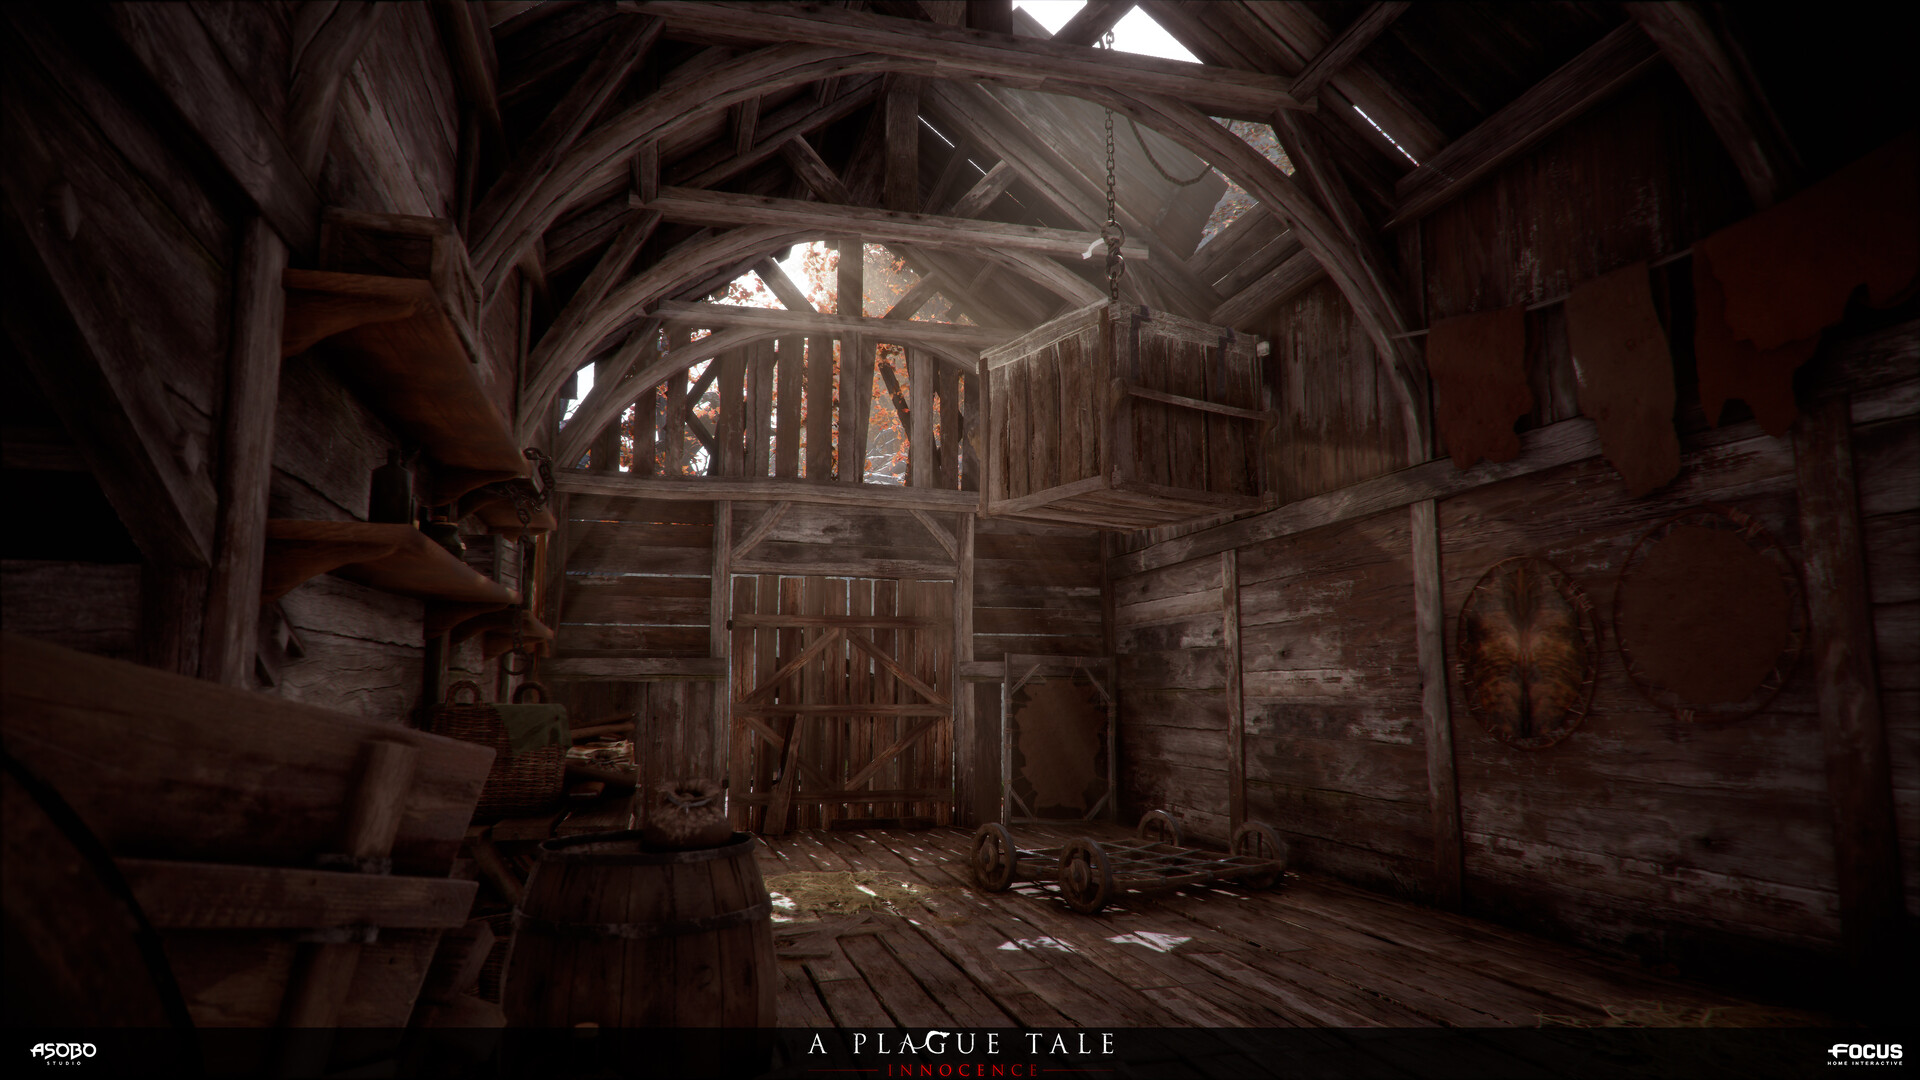 Paul Cousin - A Plague Tale: Innocence- Chapter II : The Strangers